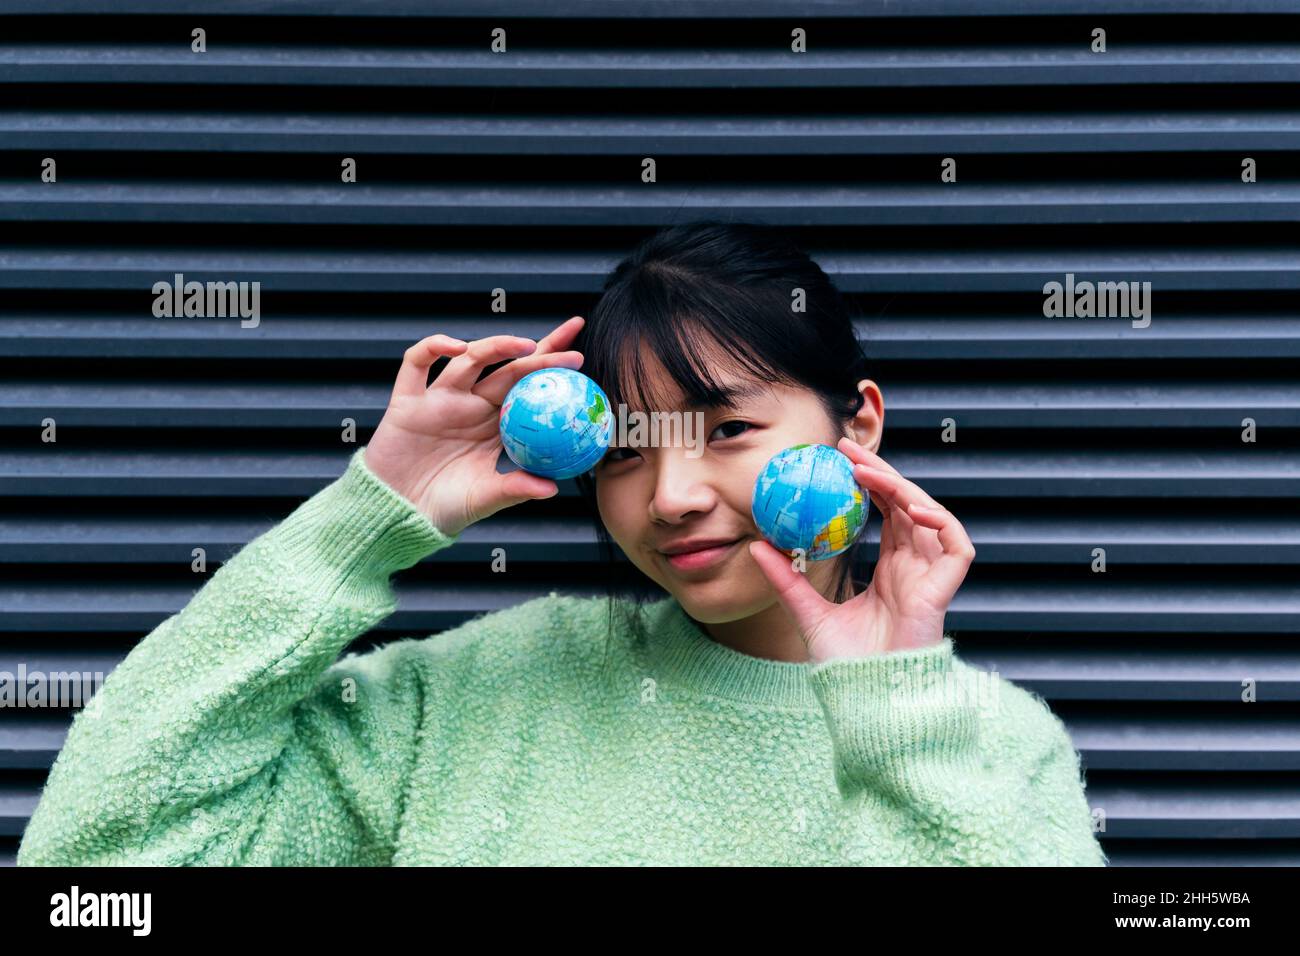 Woman with bangs holding small globes Stock Photo